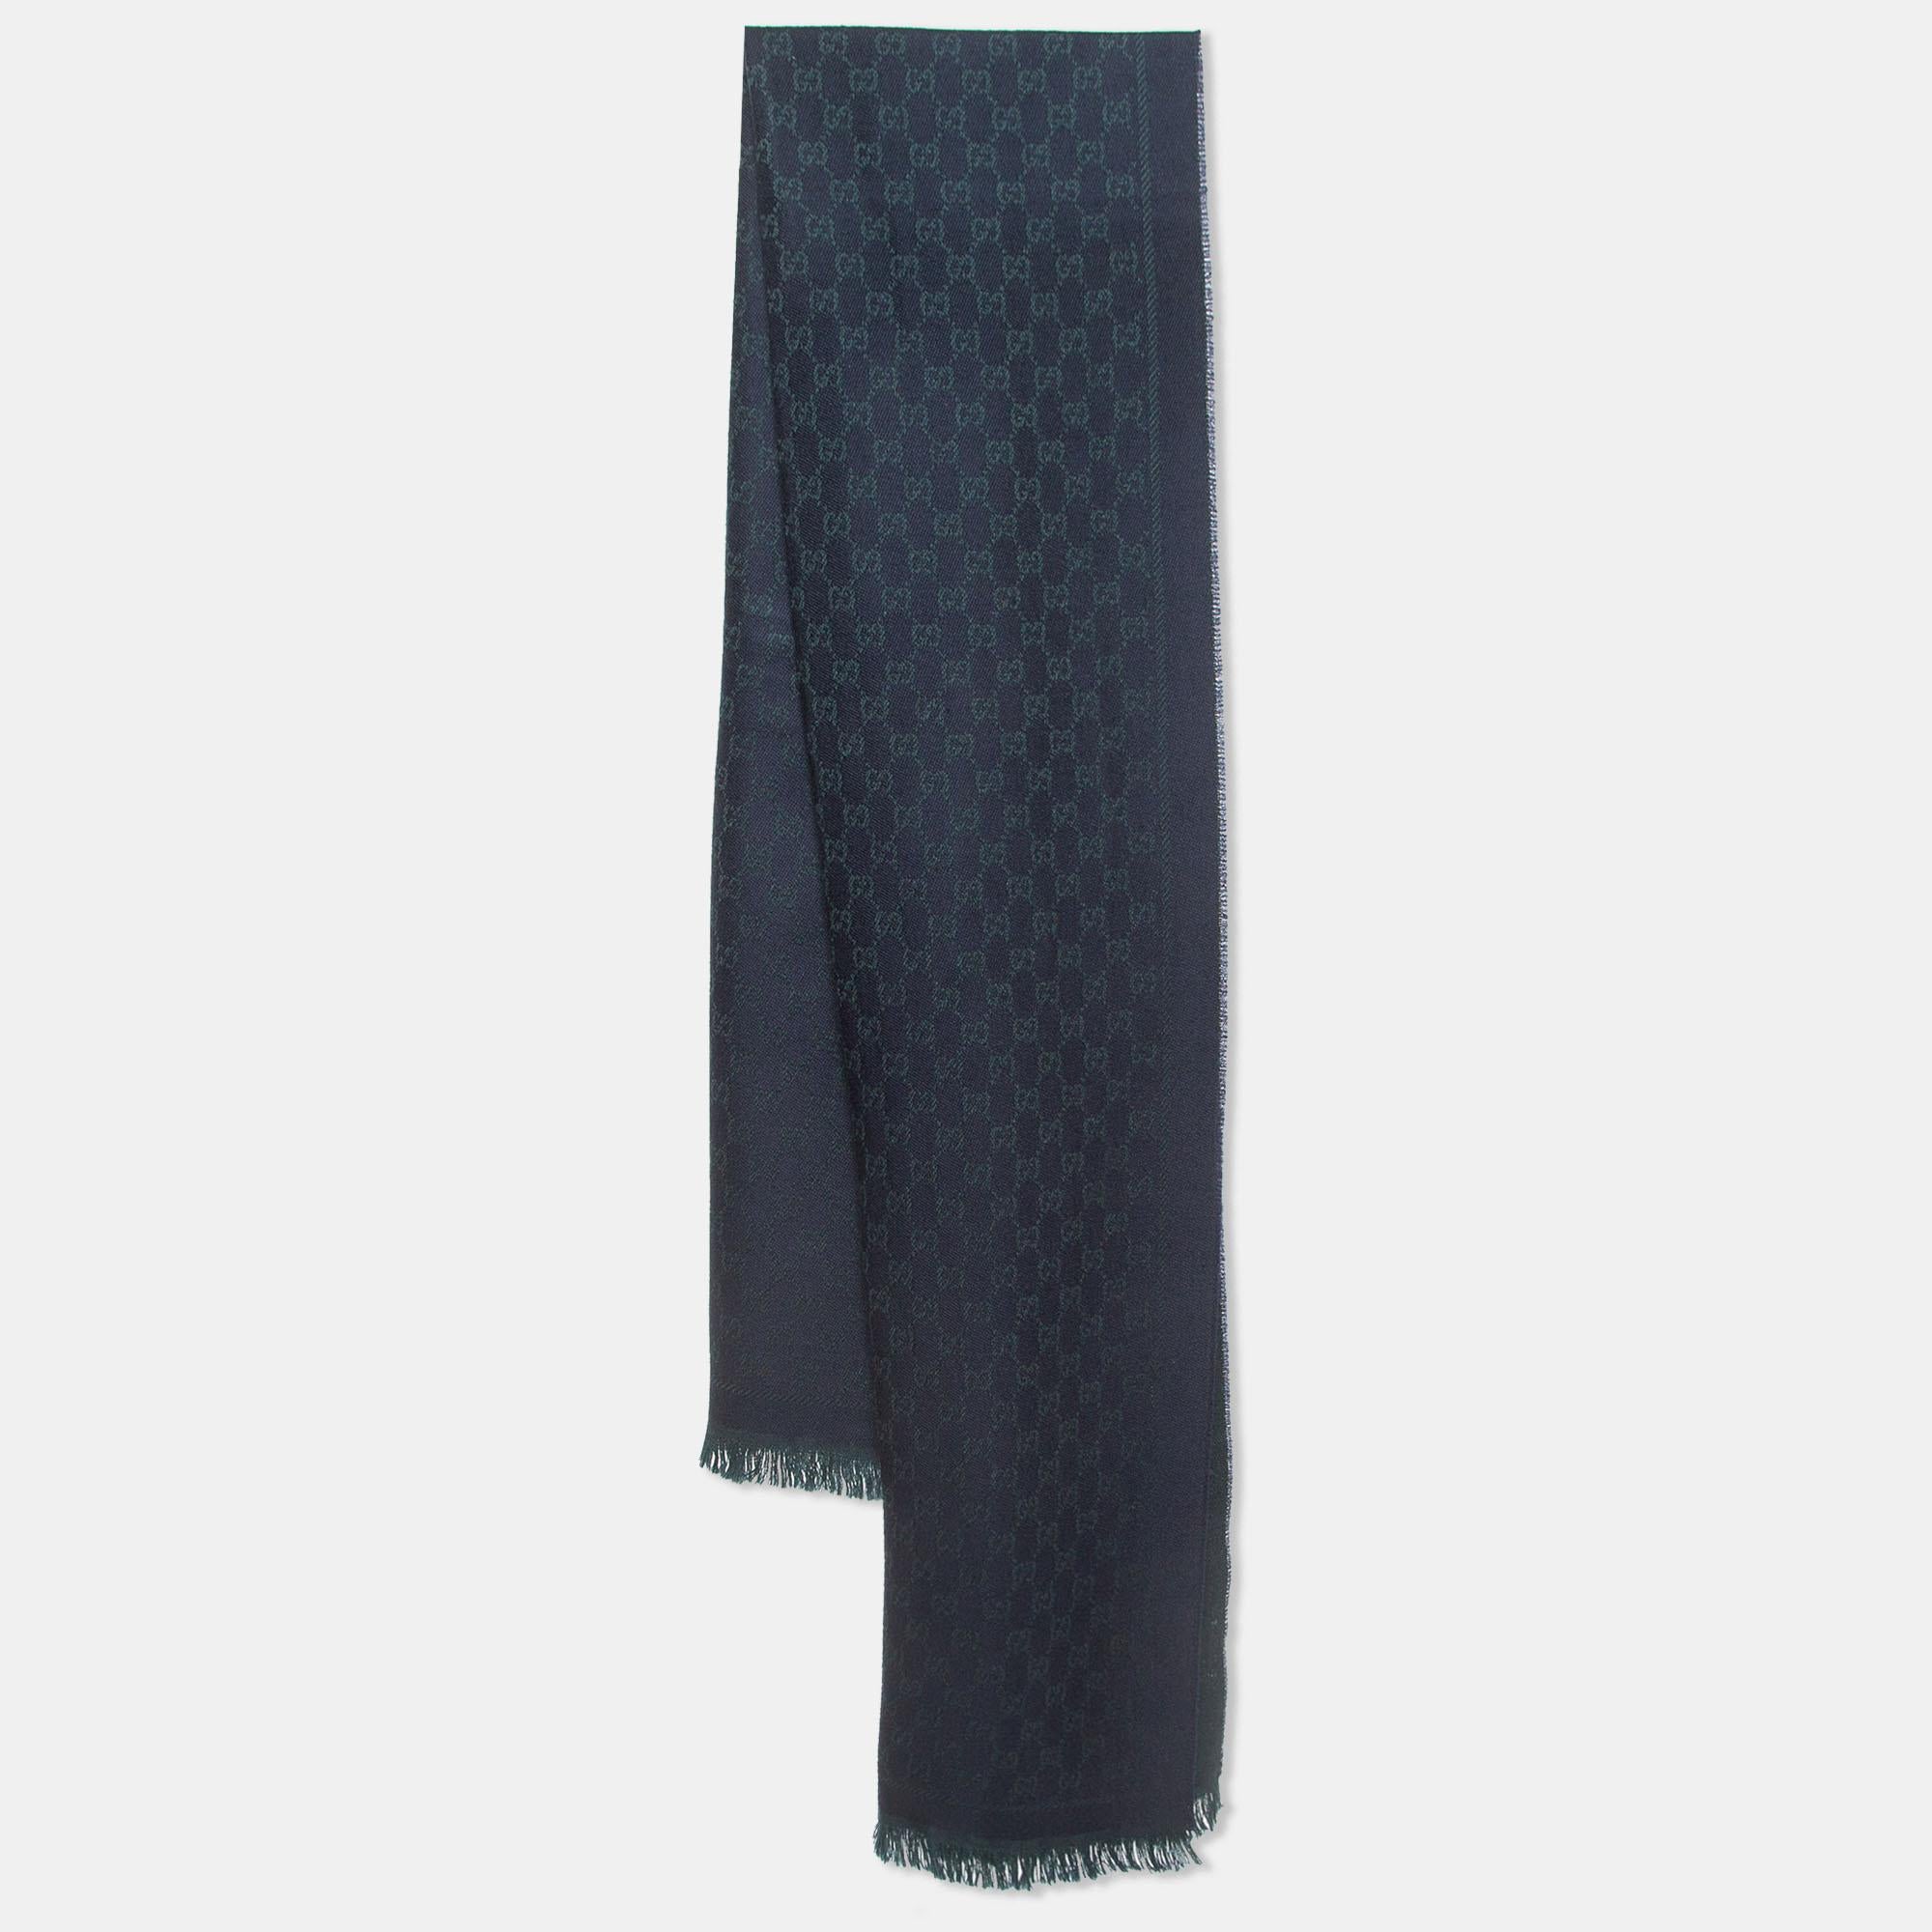 This lovely scarf is a fun way to accessorize your casual outfits and statement totes. This scarf from Gucci features an interesting design. It is cut from smooth fabric and will elevate all your looks.

